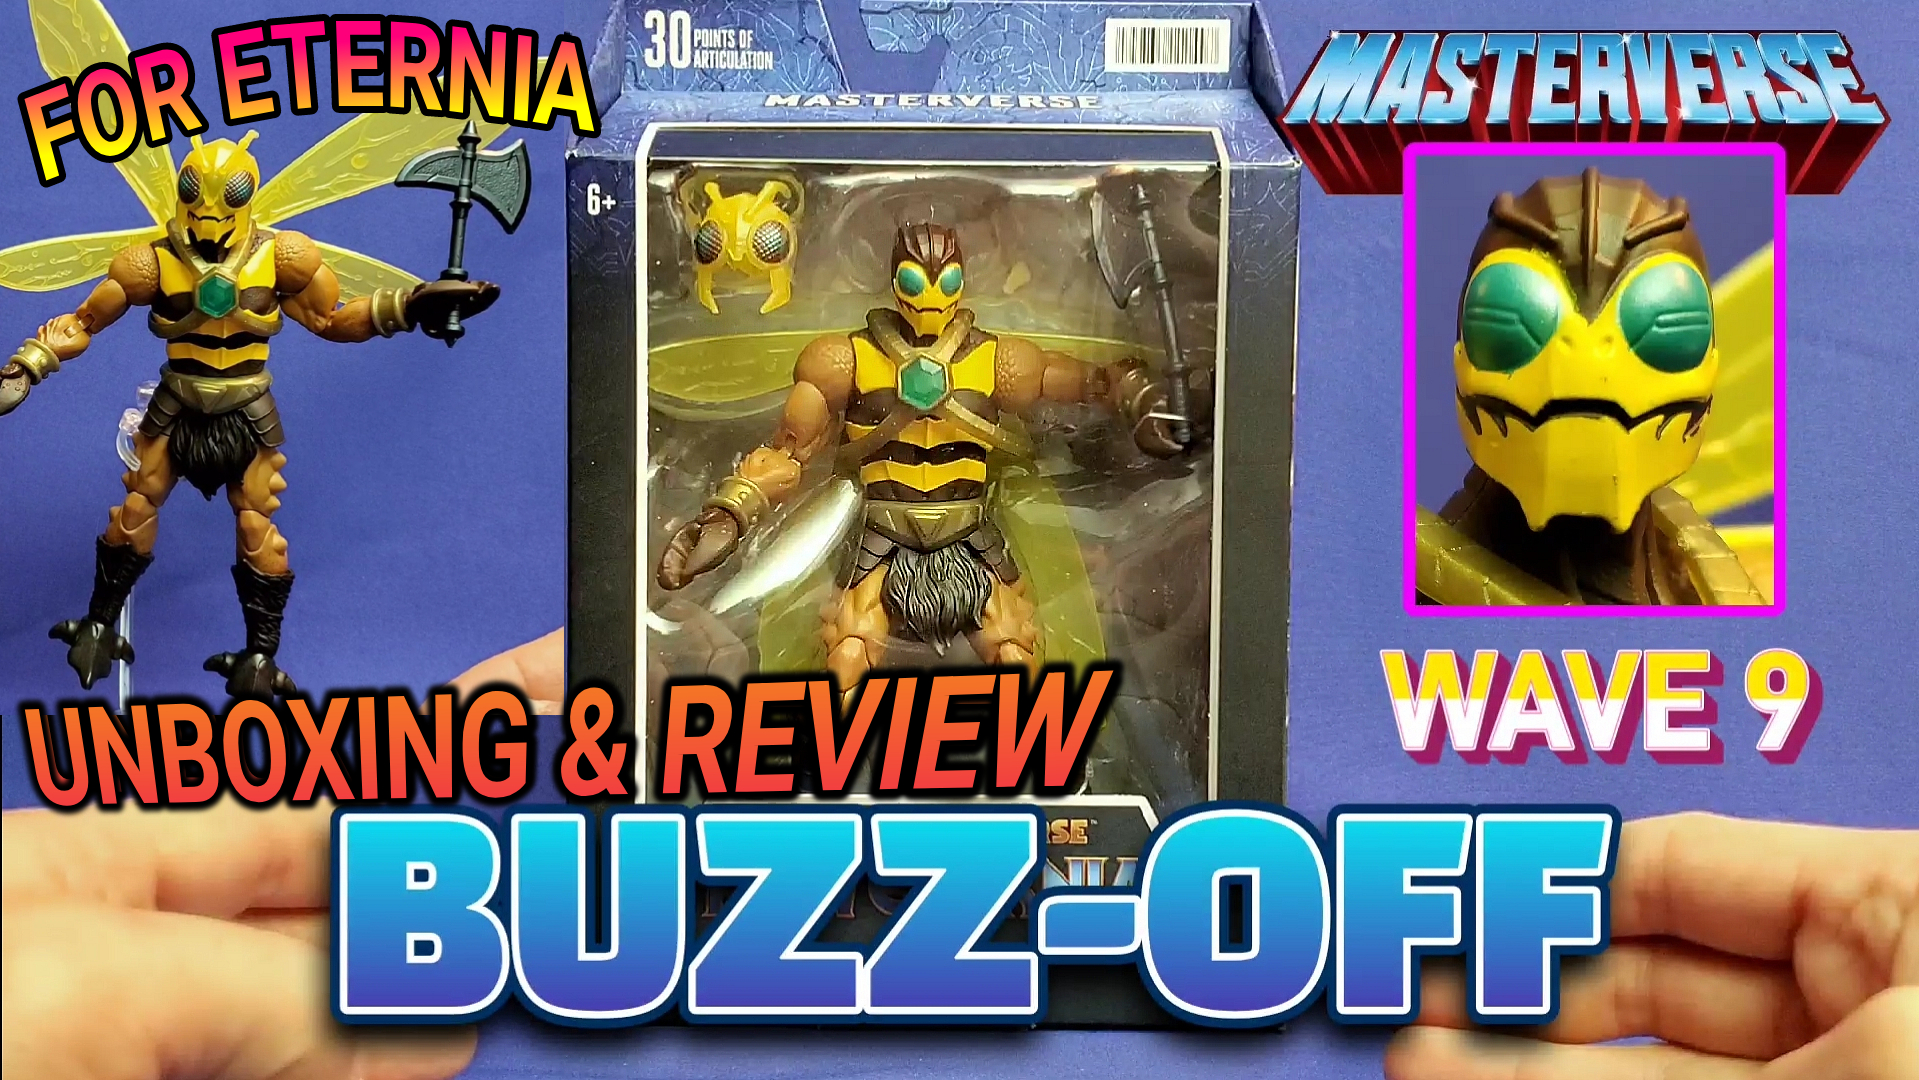 Watch our UNBOXING & REVIEW of the MASTERVERSE Buzz-Off Wave 9 New Eternia Figure